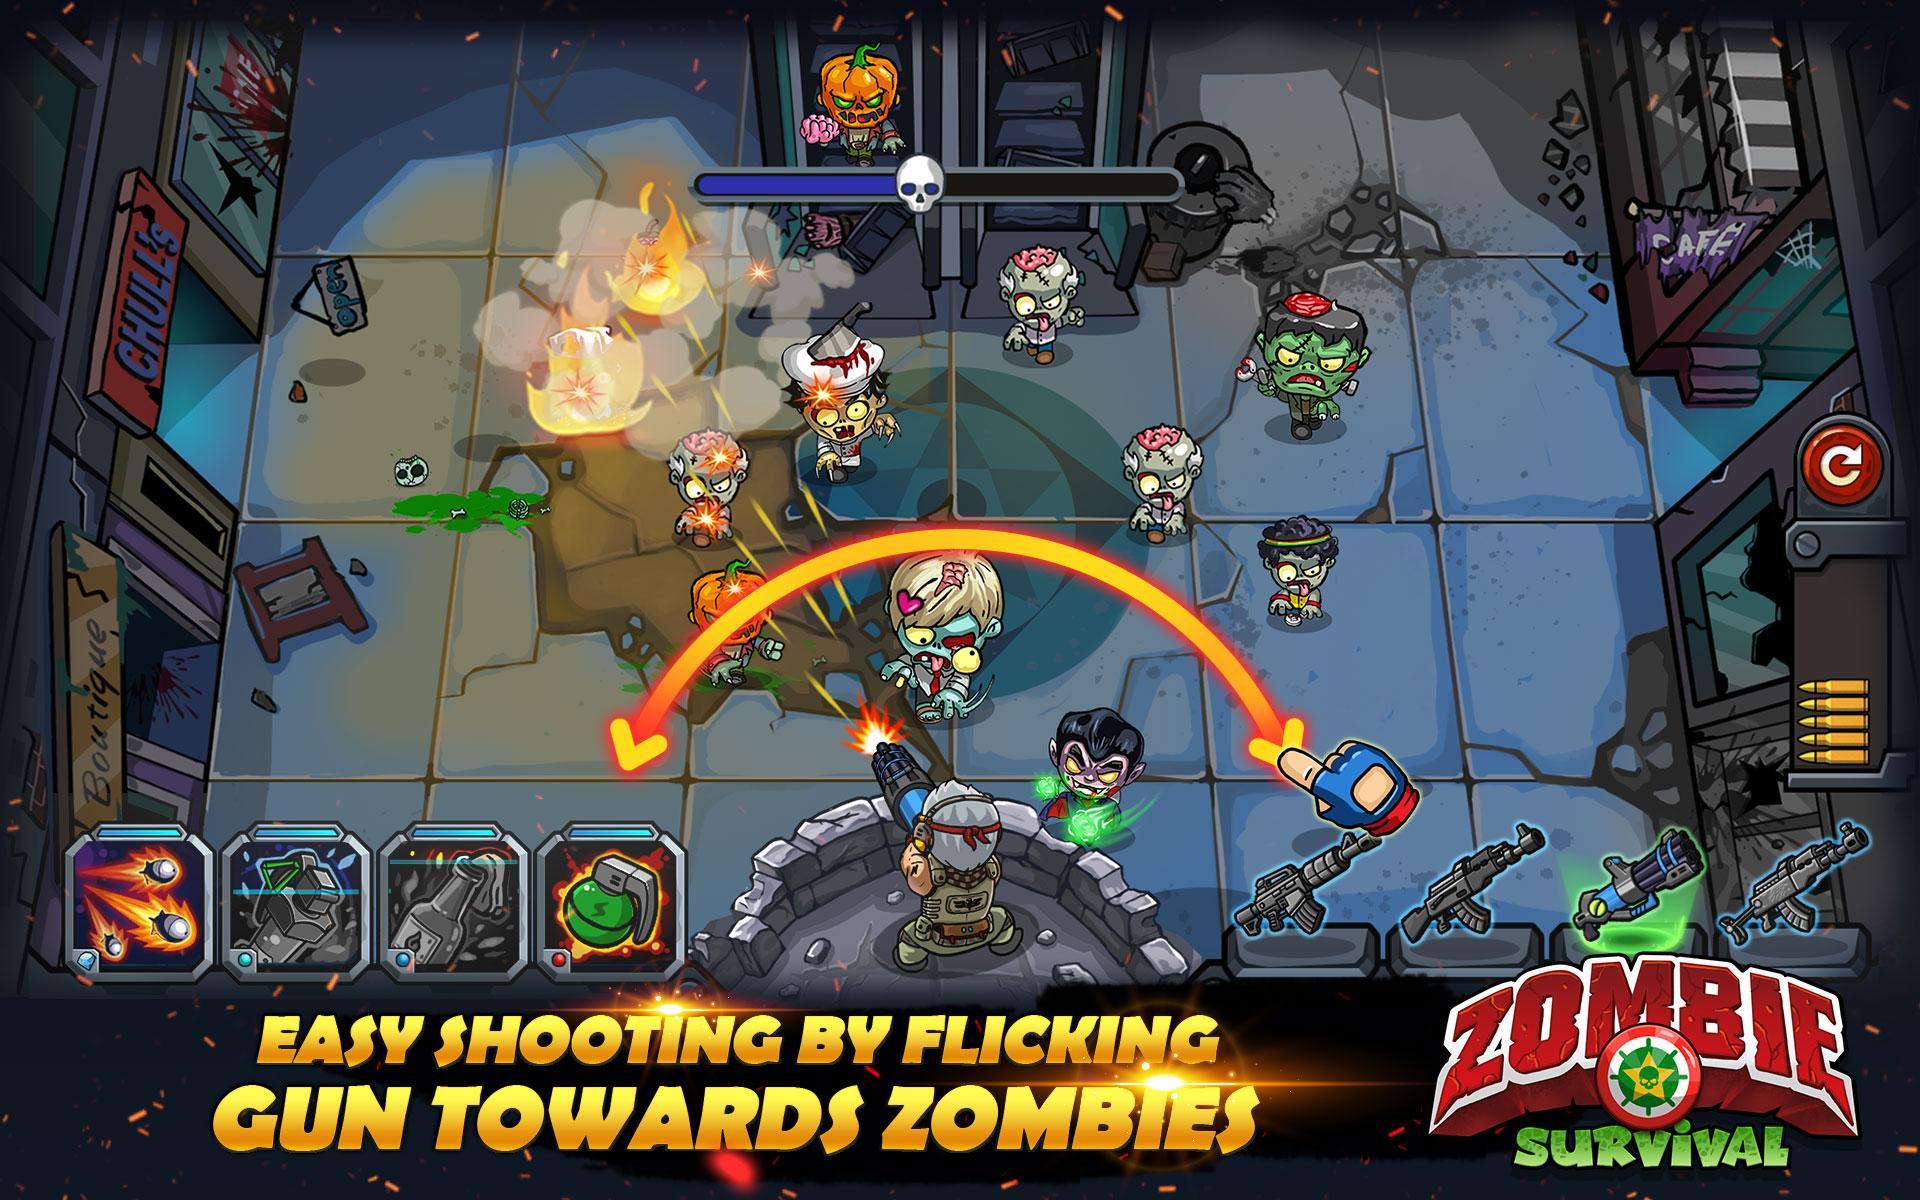 Zombie Survival For Android Apk Download - roblox how to make a zombie survival game